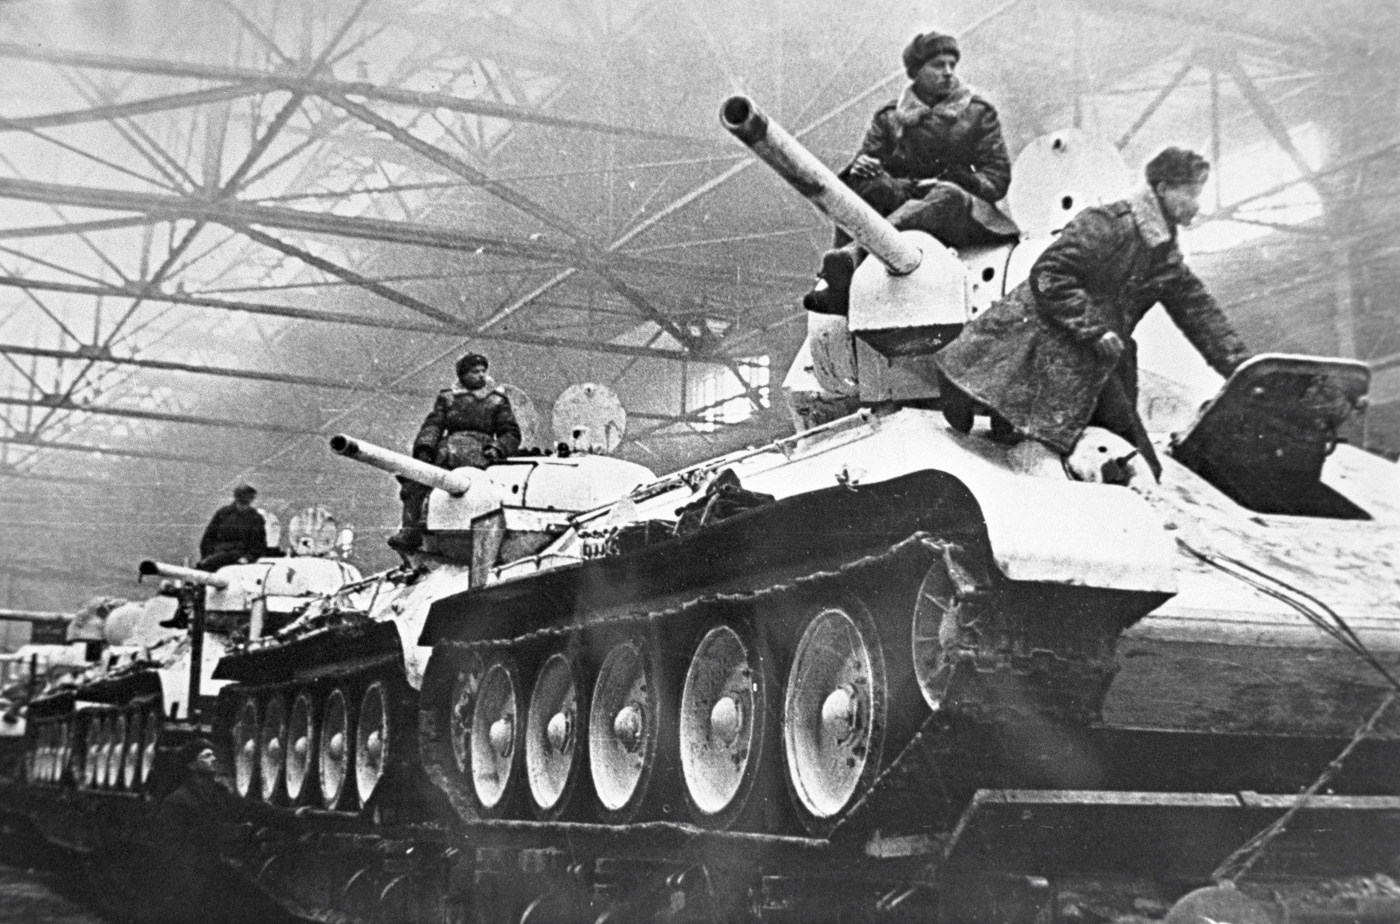 t-34 tank on factory assembly line